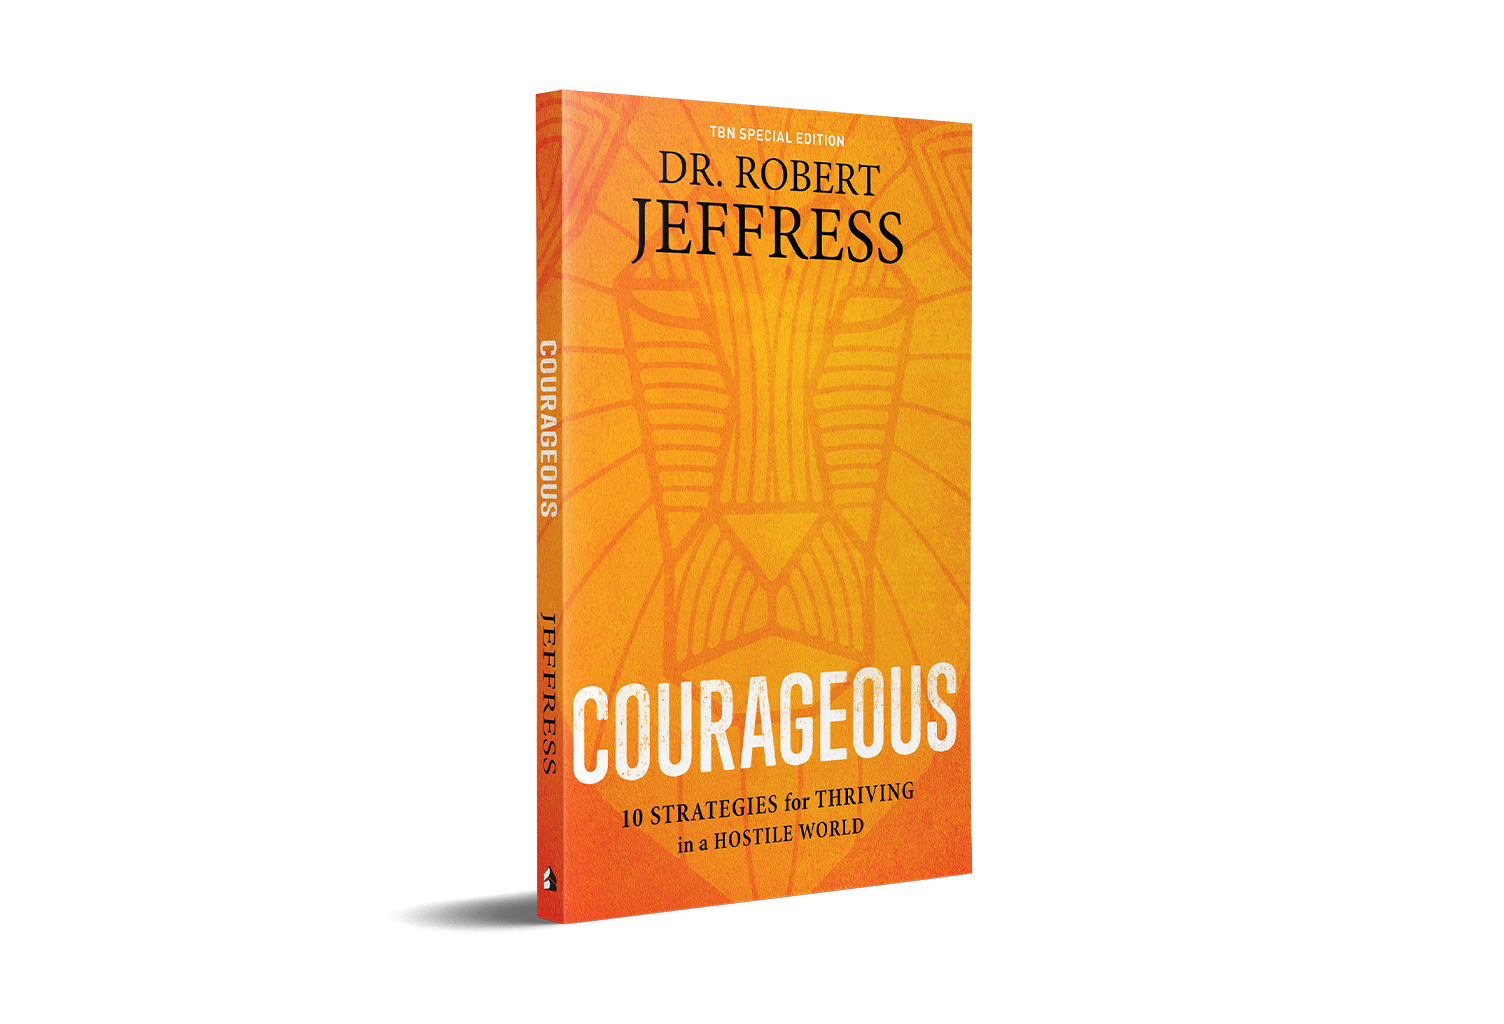 Courageous: Ten Strategies for Thriving in a Hostile World, by Dr. Robert Jeffress on TBN